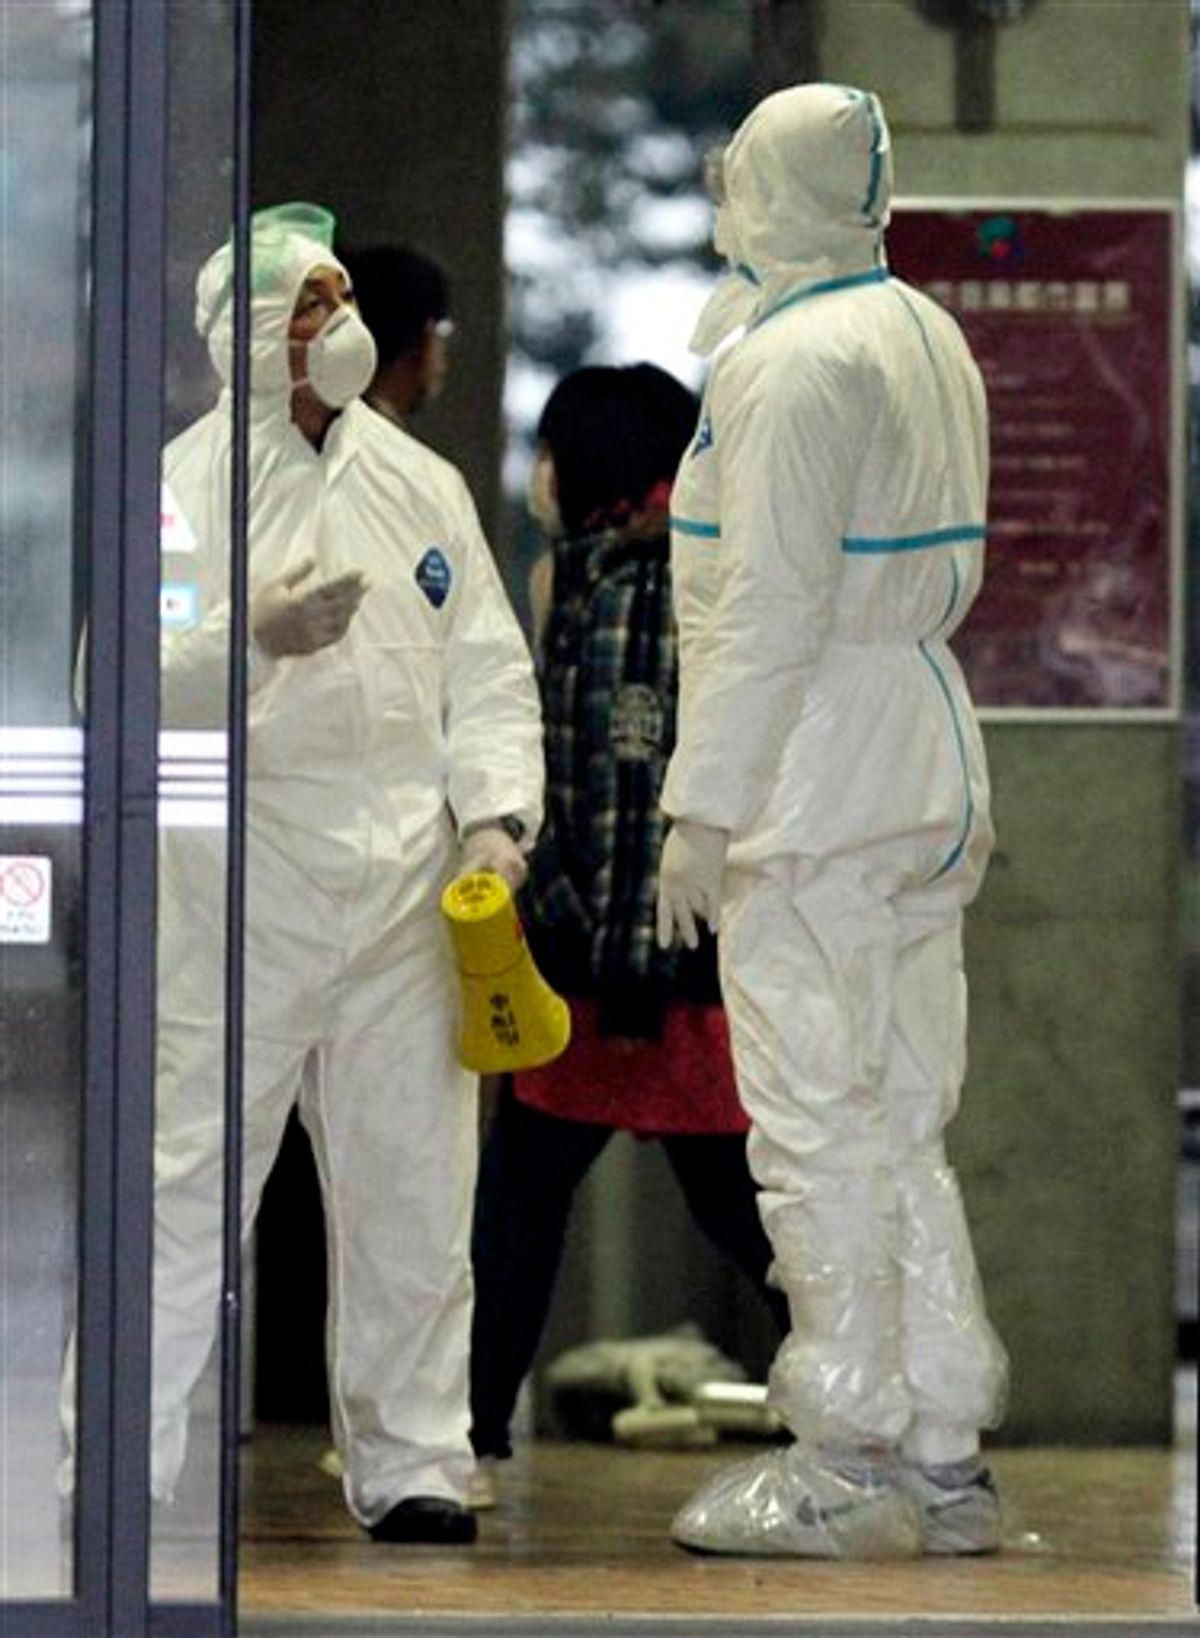 Officials wearing protective suits chat as they usher people through a radiation emergency scanning center in Koriyama, Japan, Tuesday, March 15, 2011 four days after a giant quake and tsunami struck the country's northeastern coast. (AP Photo/Mark Baker) (AP)